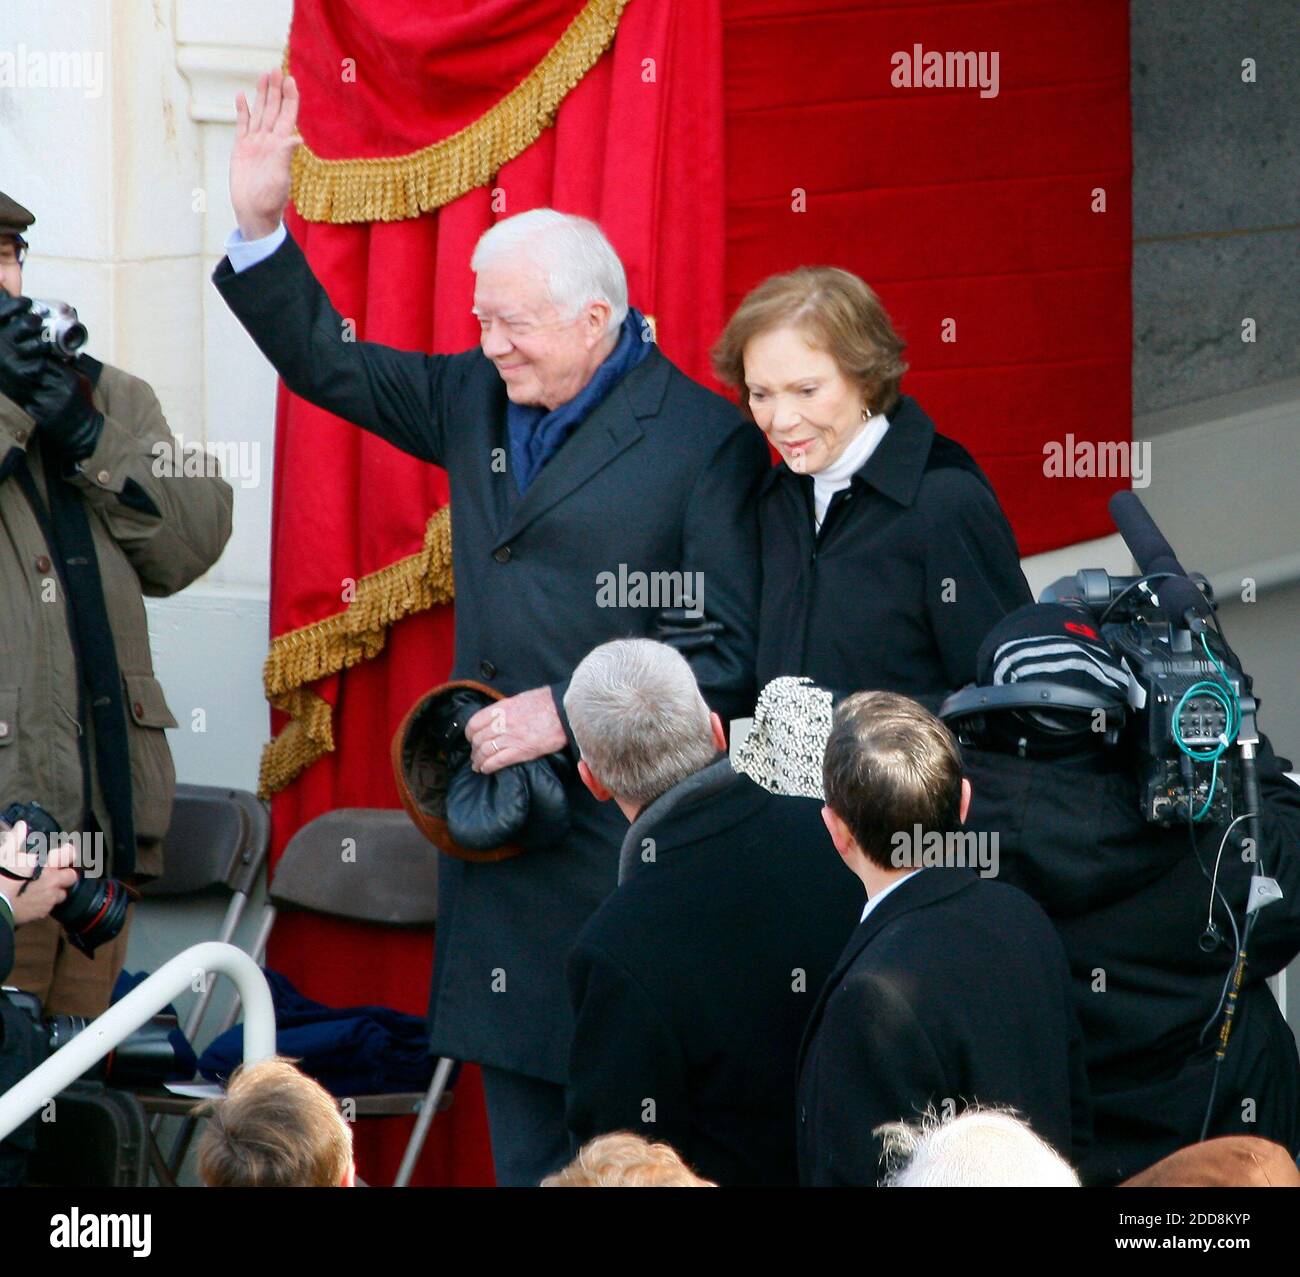 NO FILM, NO VIDEO, NO TV, NO DOCUMENTARY - Former President Jimmy Carter and wife, Rosalynn, arrive at the U.S. Capitol for the inauguation of President Barack Obama as 44th U.S. President in Washington, DC, USA on January 20, 2009. Obama becomes the first African-American to be elected to the office of President in the history of the United States. Photo by Harry E. Walker/MCT/ABACAPRESS.COM Stock Photo